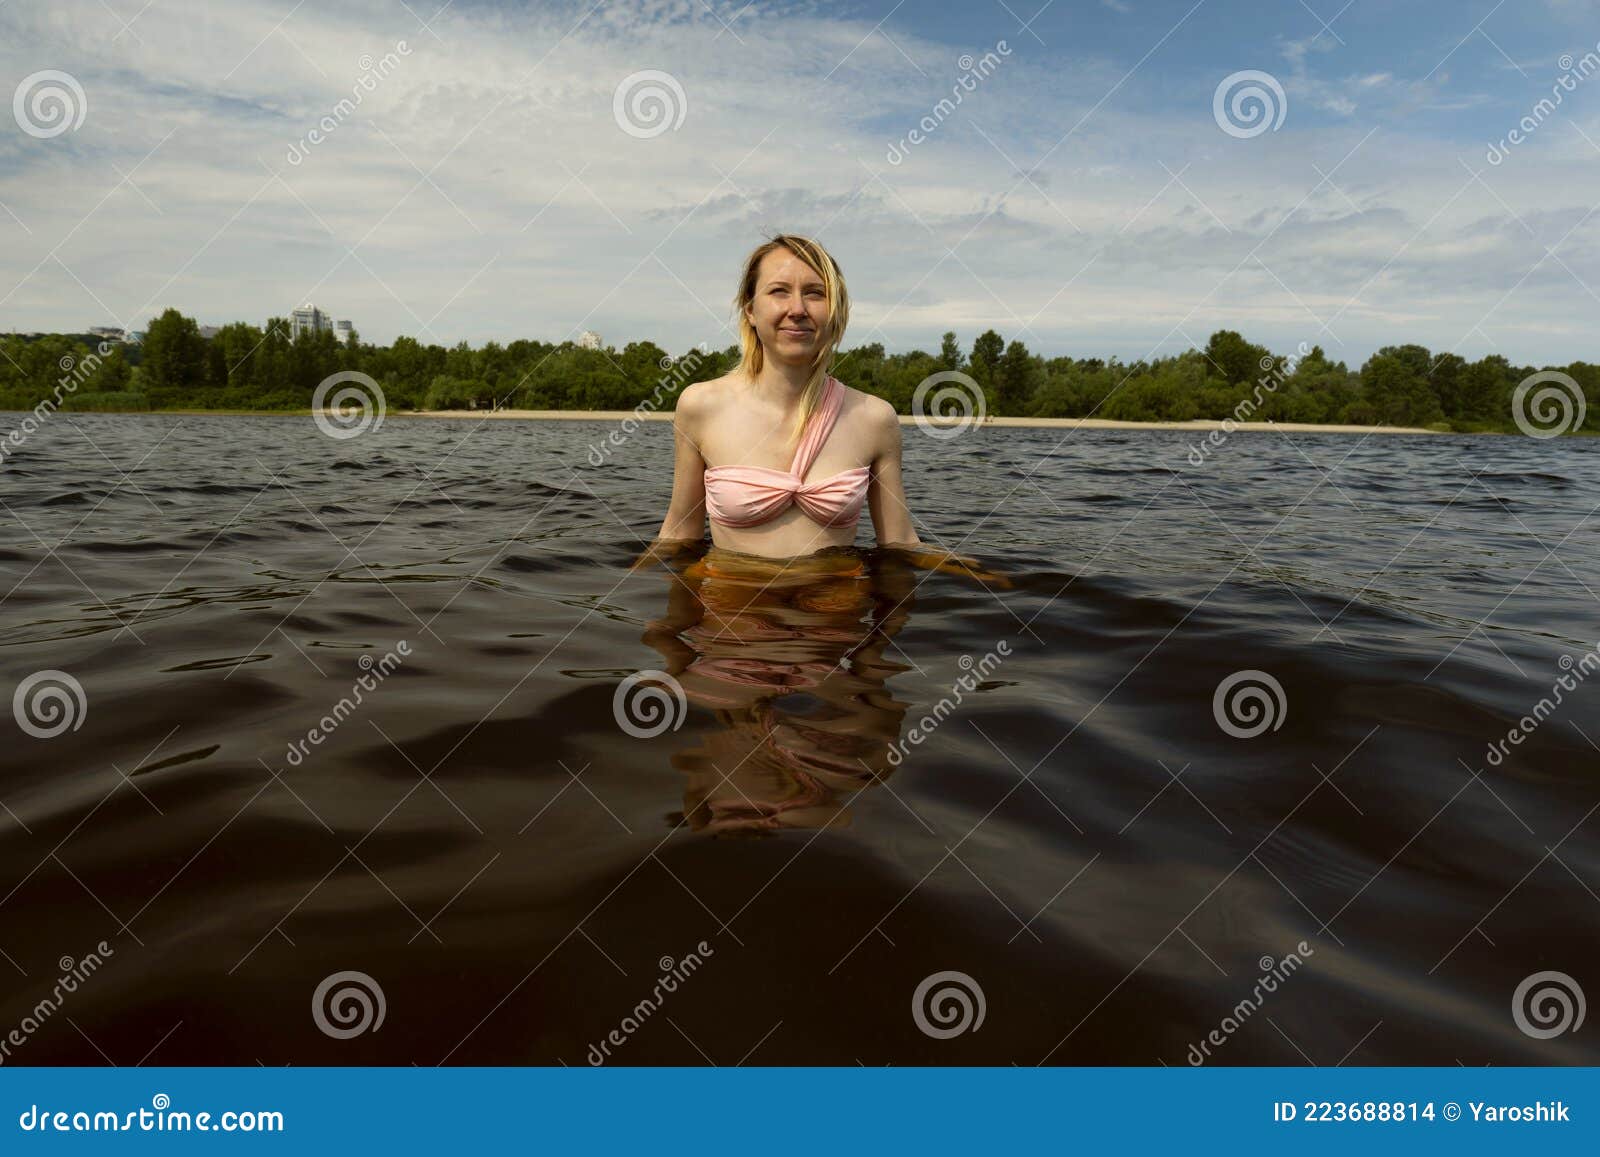 To construct Target internal 166 Woman Lingerie River Water Stock Photos - Free & Royalty-Free Stock  Photos from Dreamstime